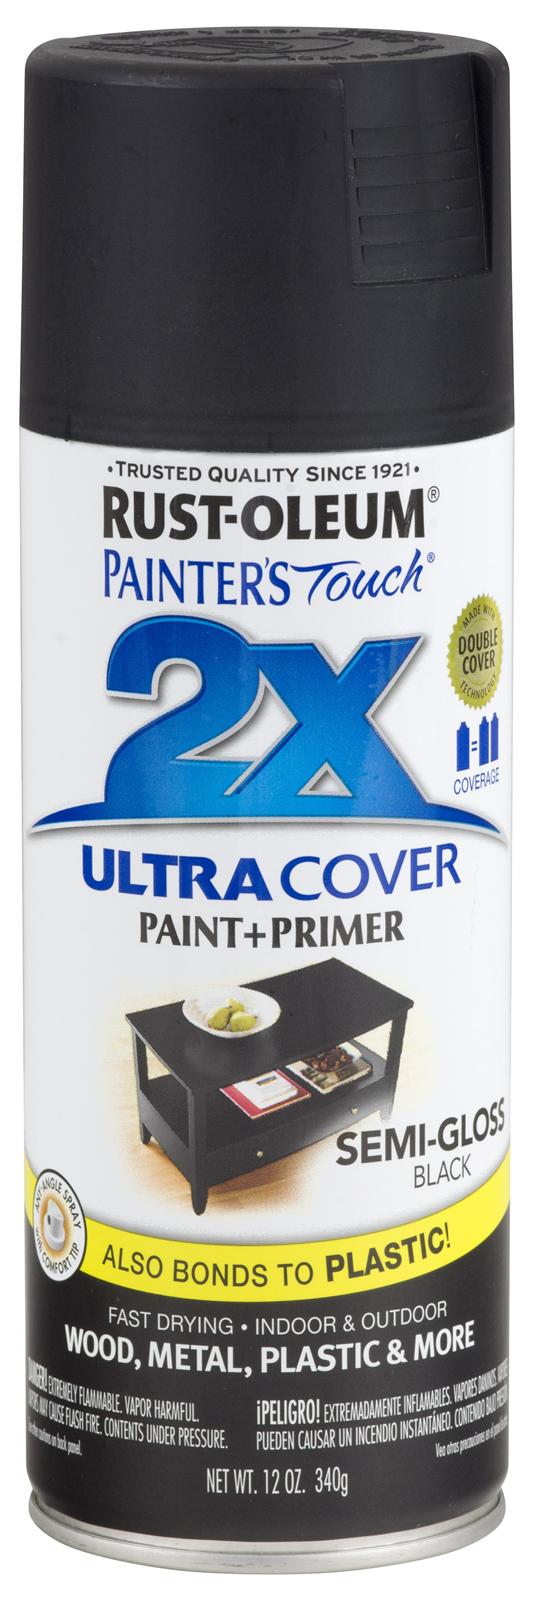 Rust-Oleum® Painter's® Touch 249061 Spray Paint, 12 oz Container, Black, Semi Gloss Finish